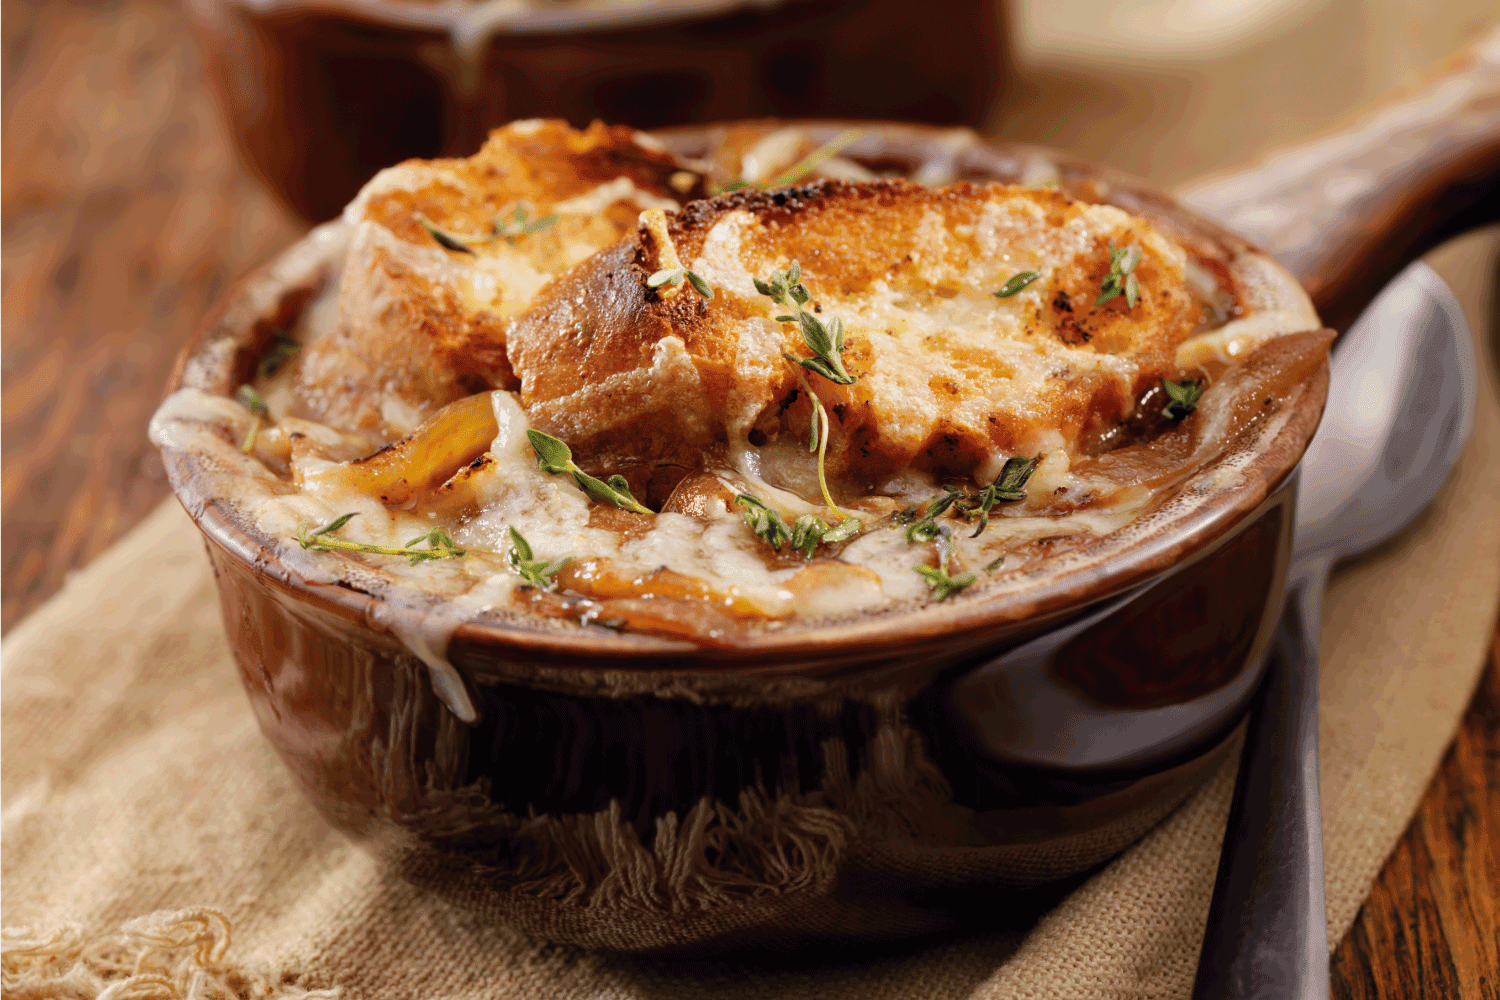 French Onion Soup on a ceramic bowl, jute placemat and metal spoon on wooden table